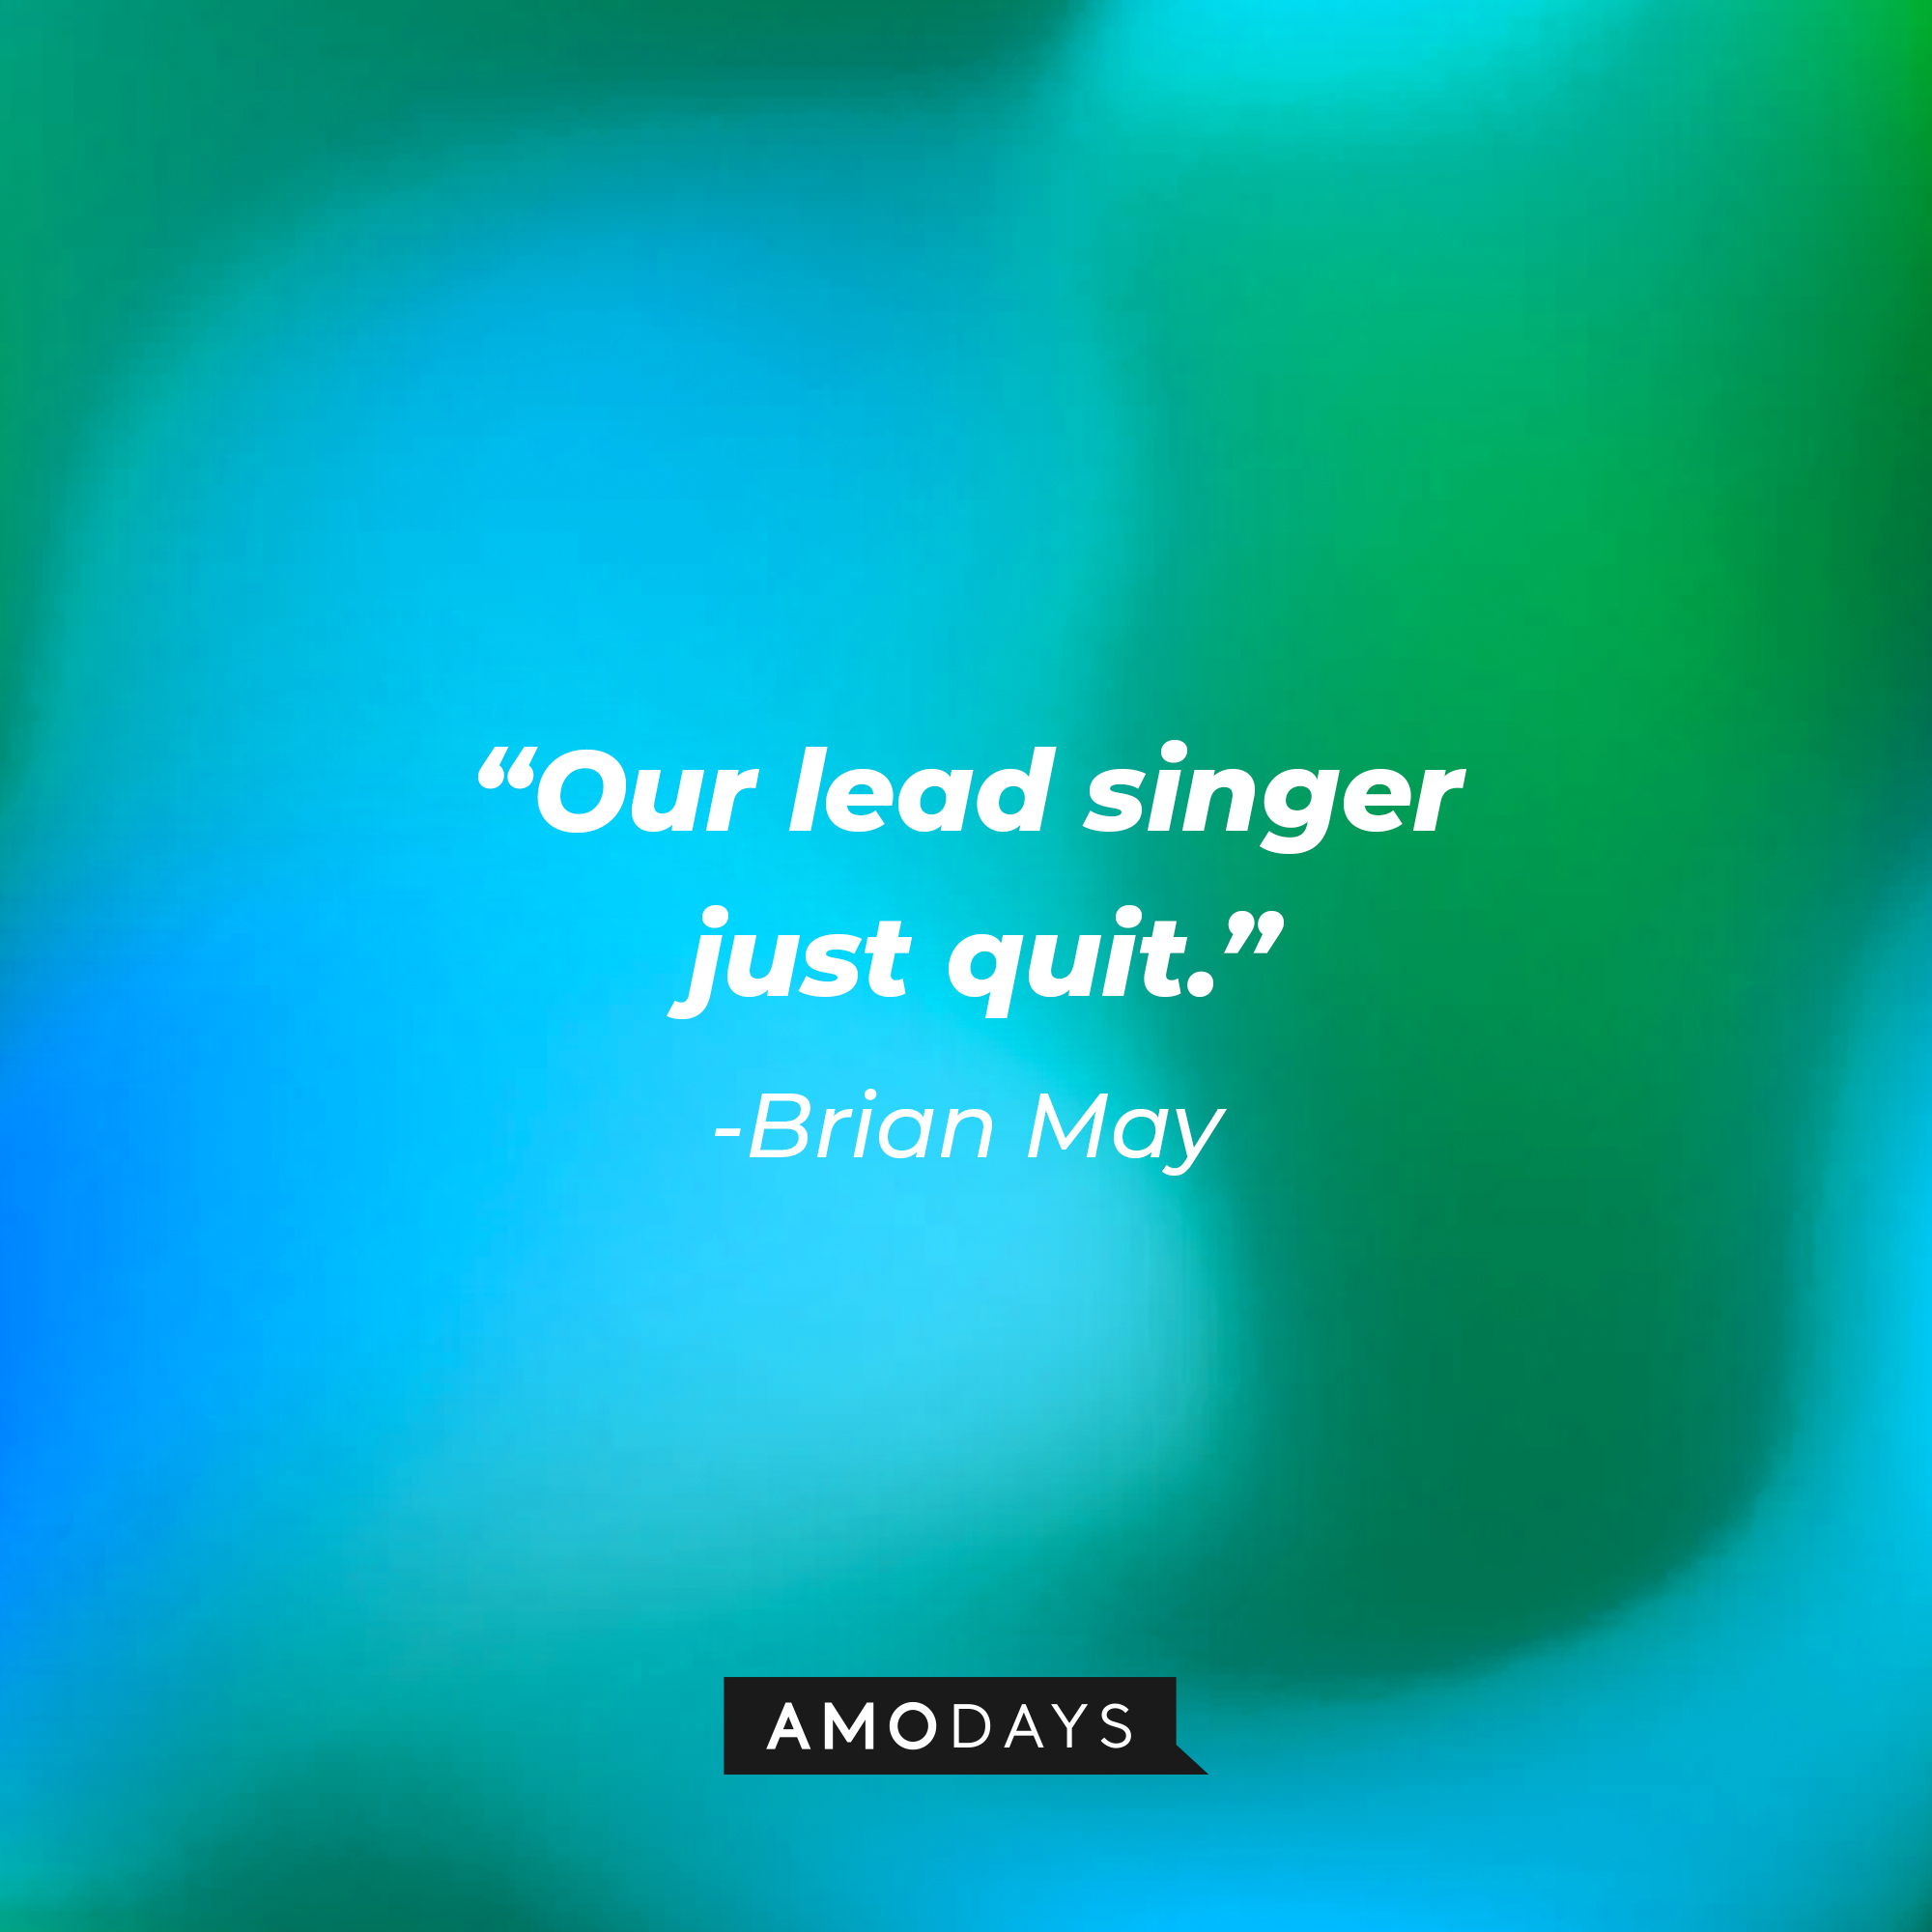 Brian May with his quote: "Our lead singer just quit." | Source: Amodays